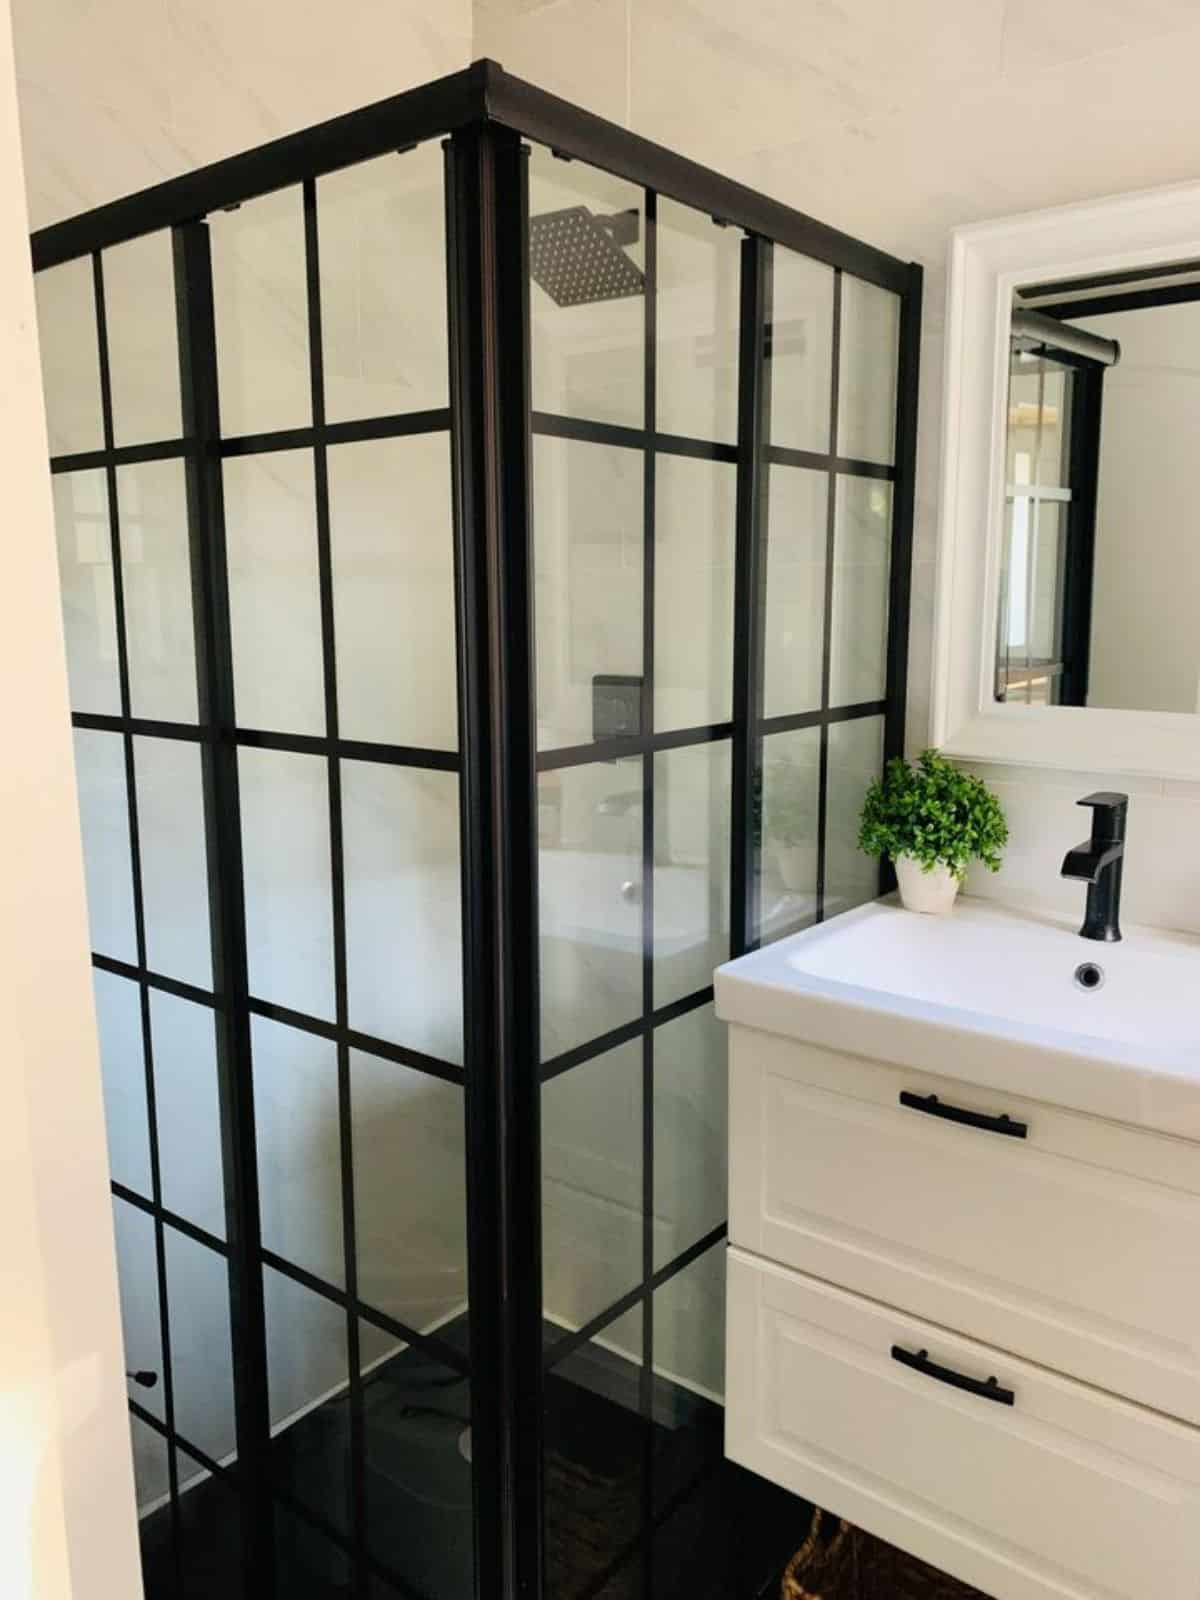 Separate shower cube with standard toilet and sink with vanity & mirror in bathroom of 20'  Shipping Container Tiny House